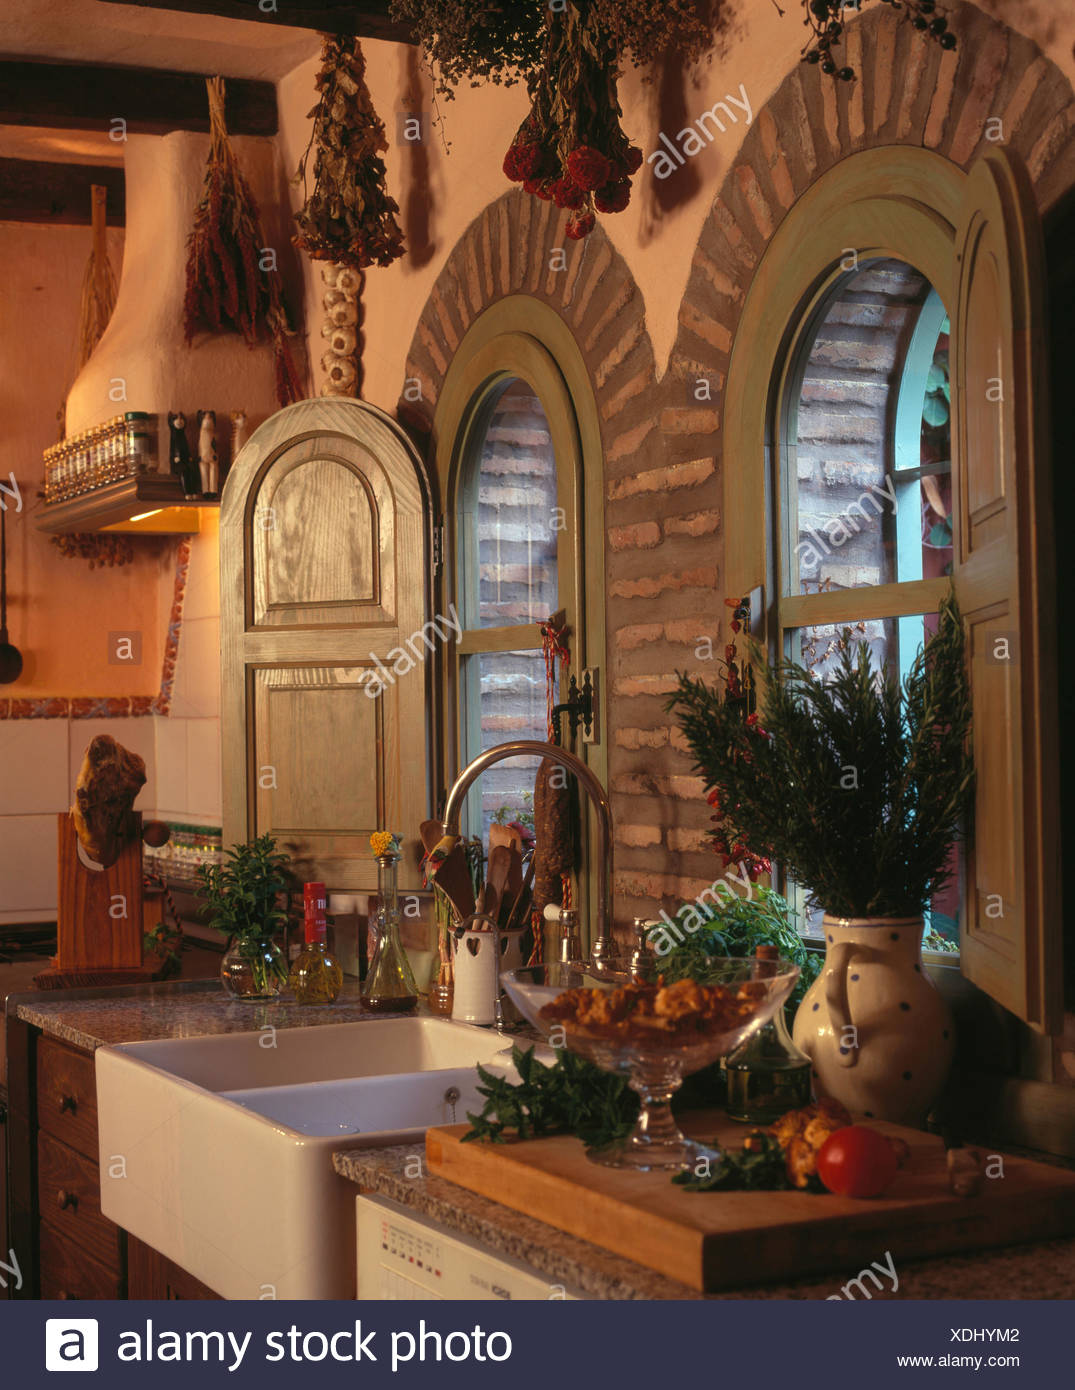 Wooden Shutters On Arched Windows Above Double Belfast Sink